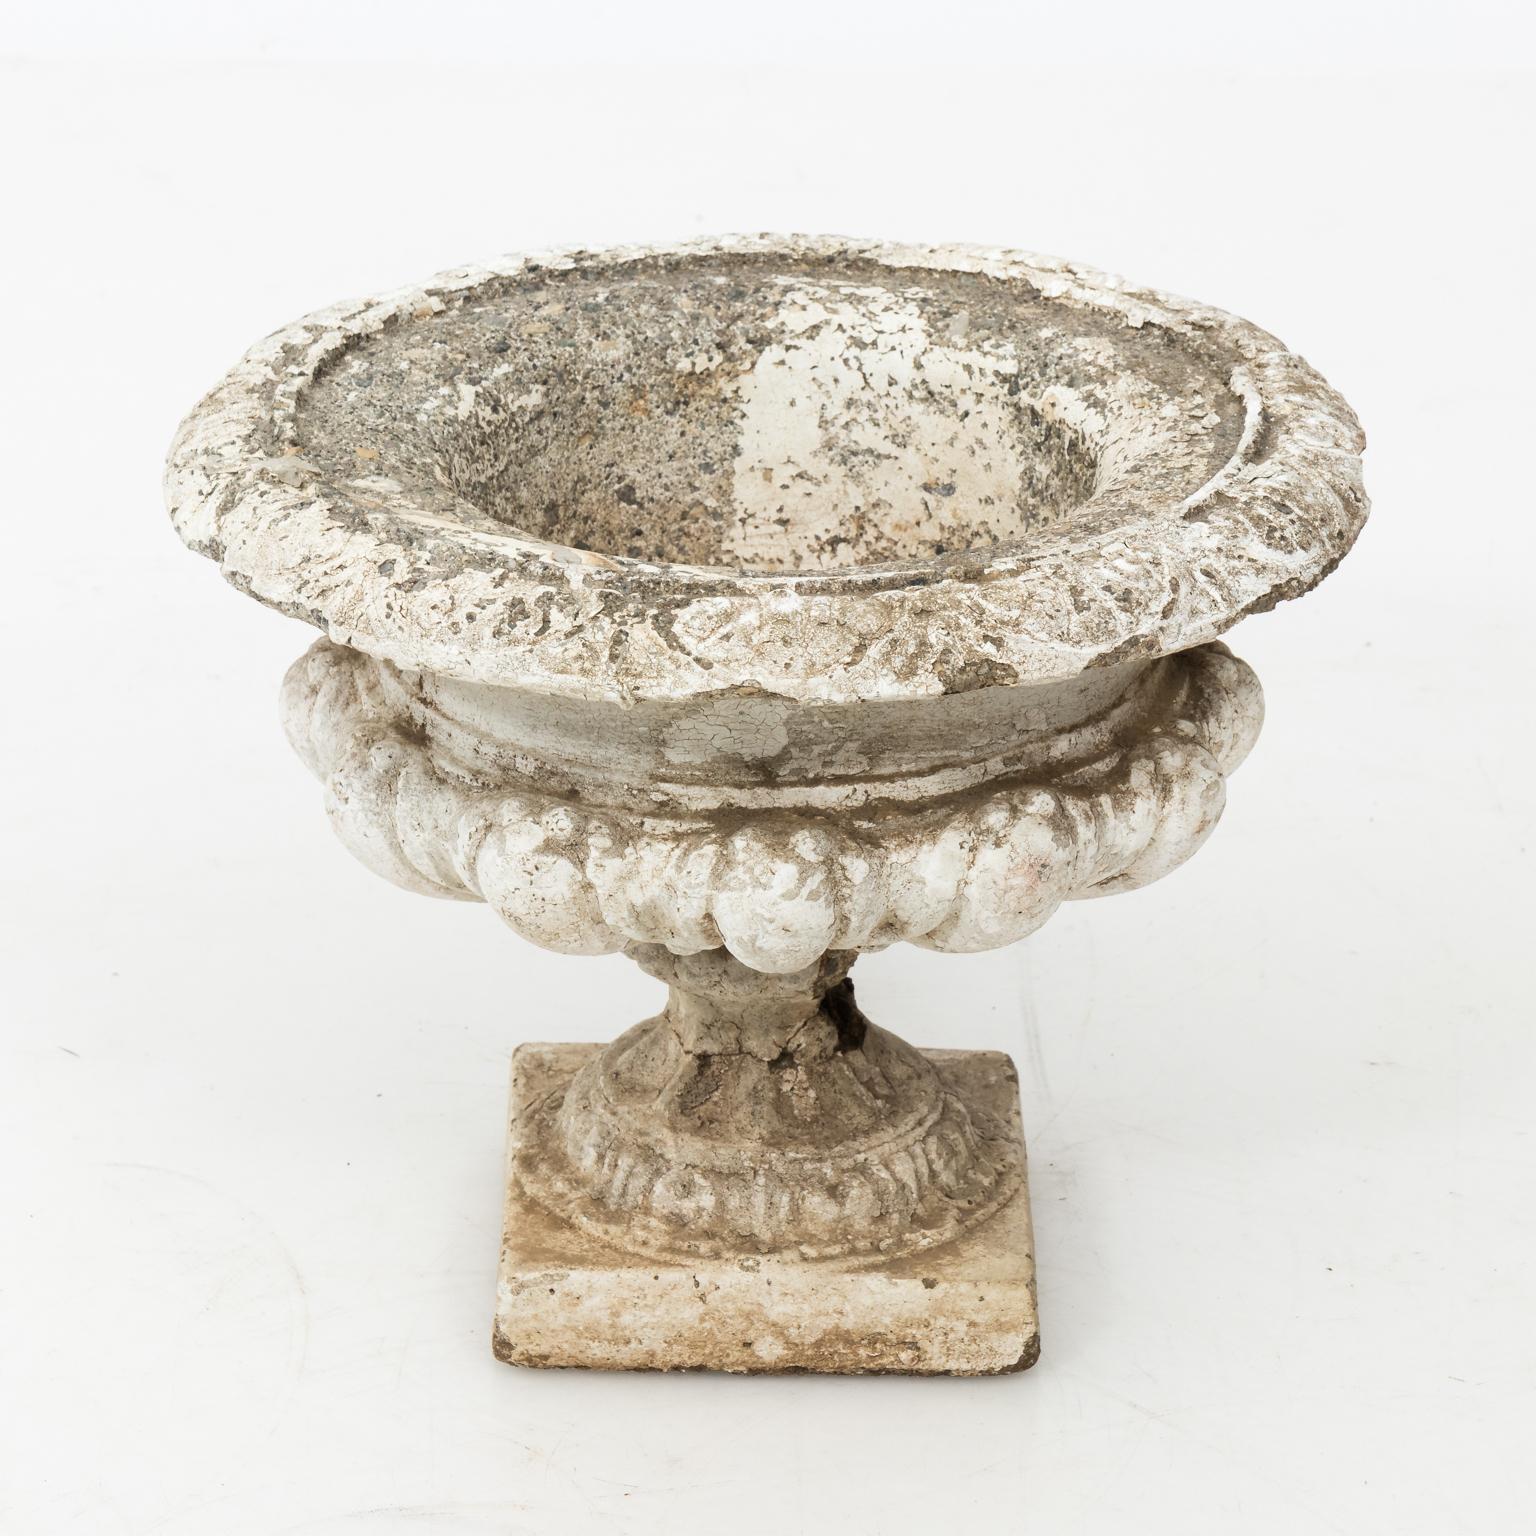 Circa 20th century Garden cement urn with egg-and-dart detail on a square pedestal. Please note of wear to age due to exposure to the elements along with damage to the stem of the urn causing cracks and minor loss.